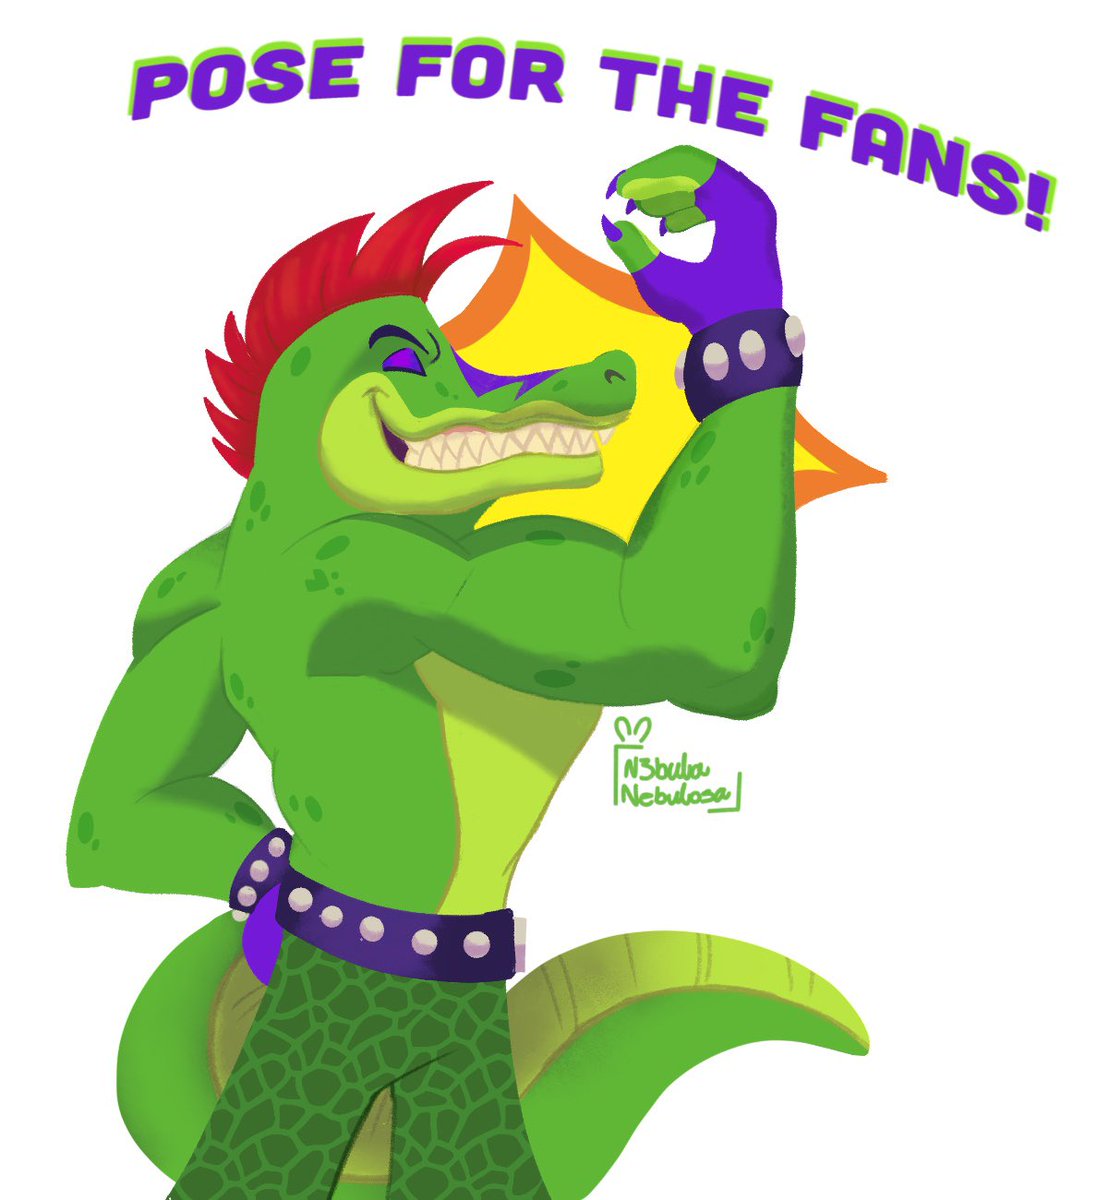 This one goes to the Monty fans #FNAF #MontgomeryGator